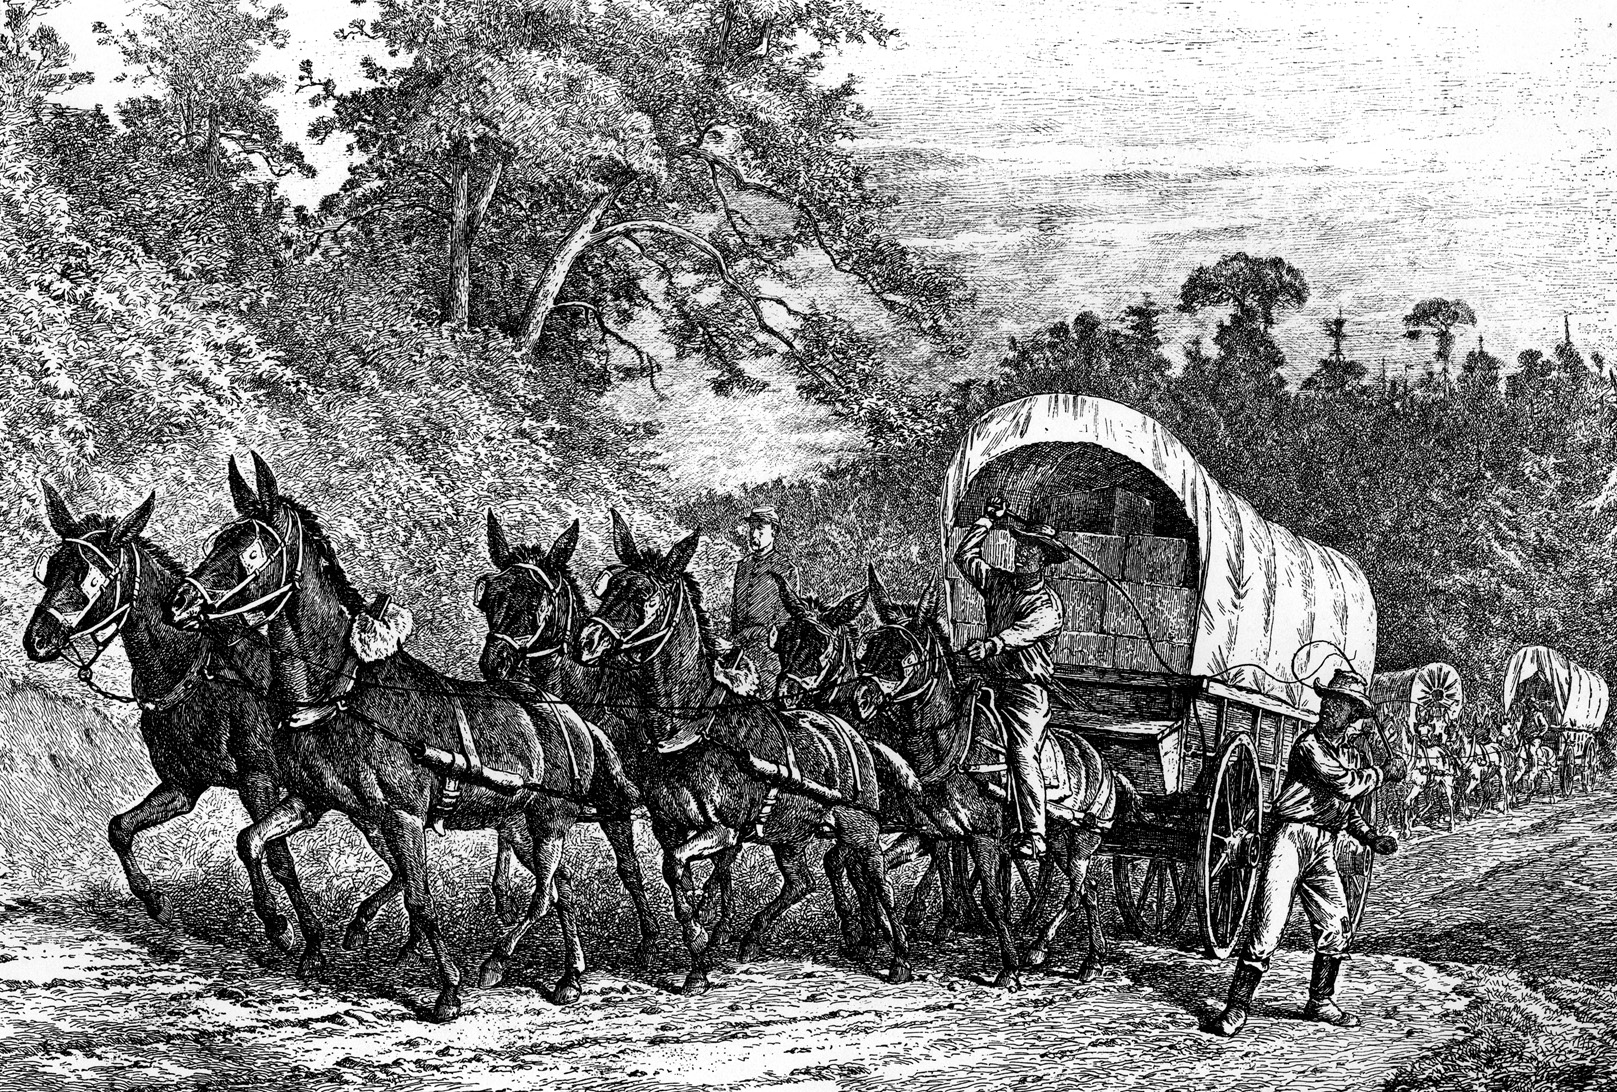 Federal wagons drawn by mules created a bottleneck at the bridge over Tishomingo Creek during the panicked Union retreat.